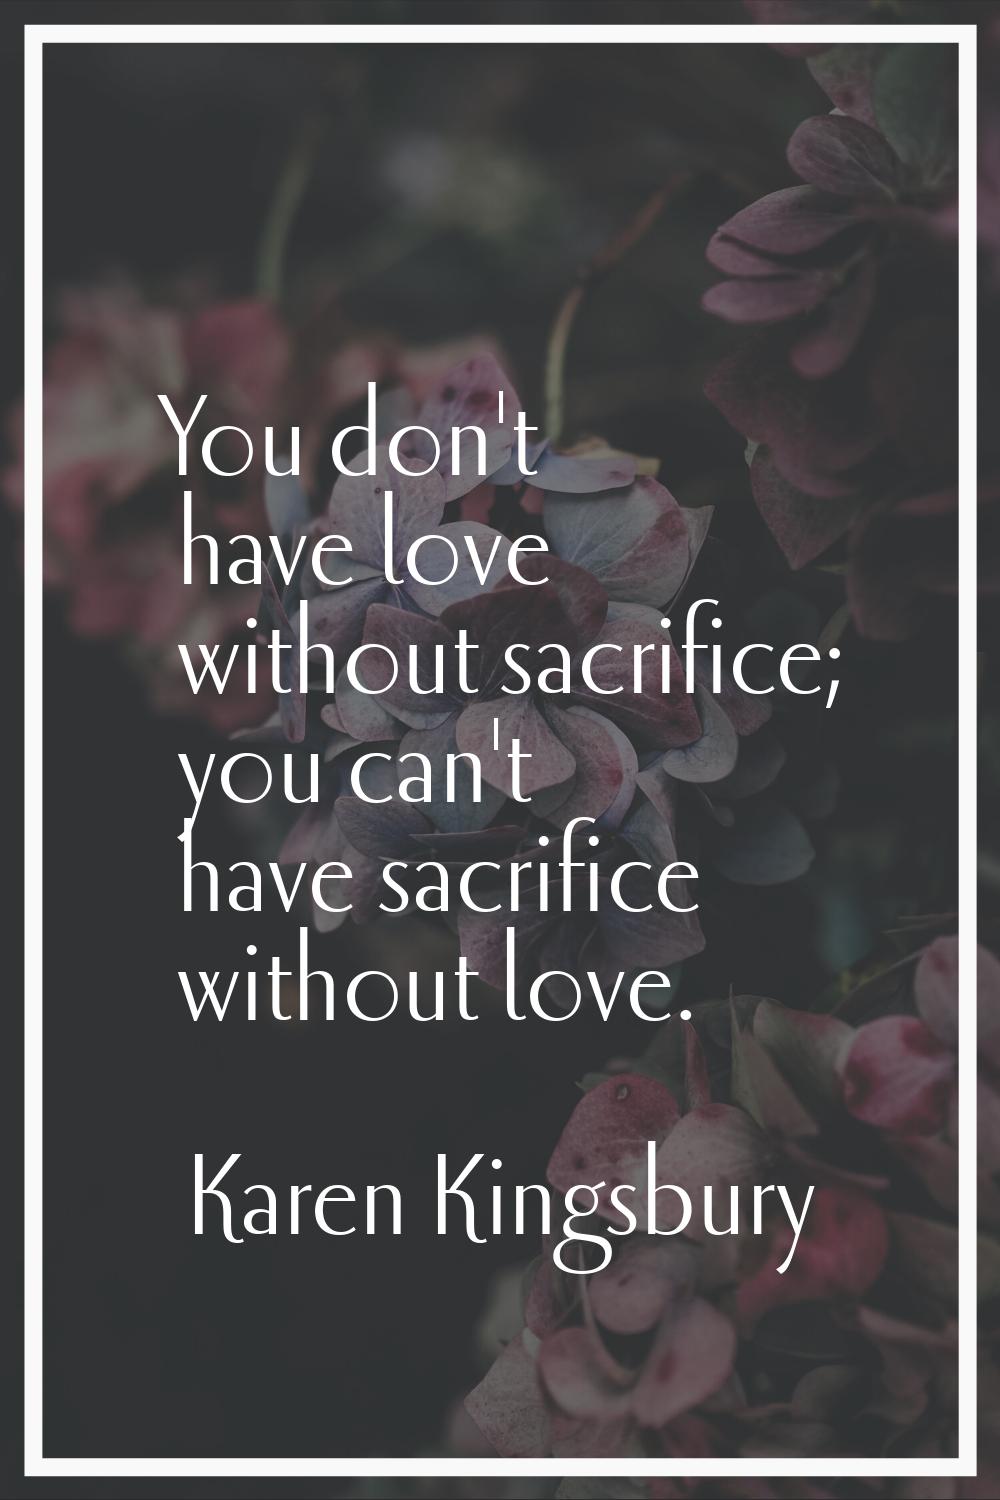 You don't have love without sacrifice; you can't have sacrifice without love.